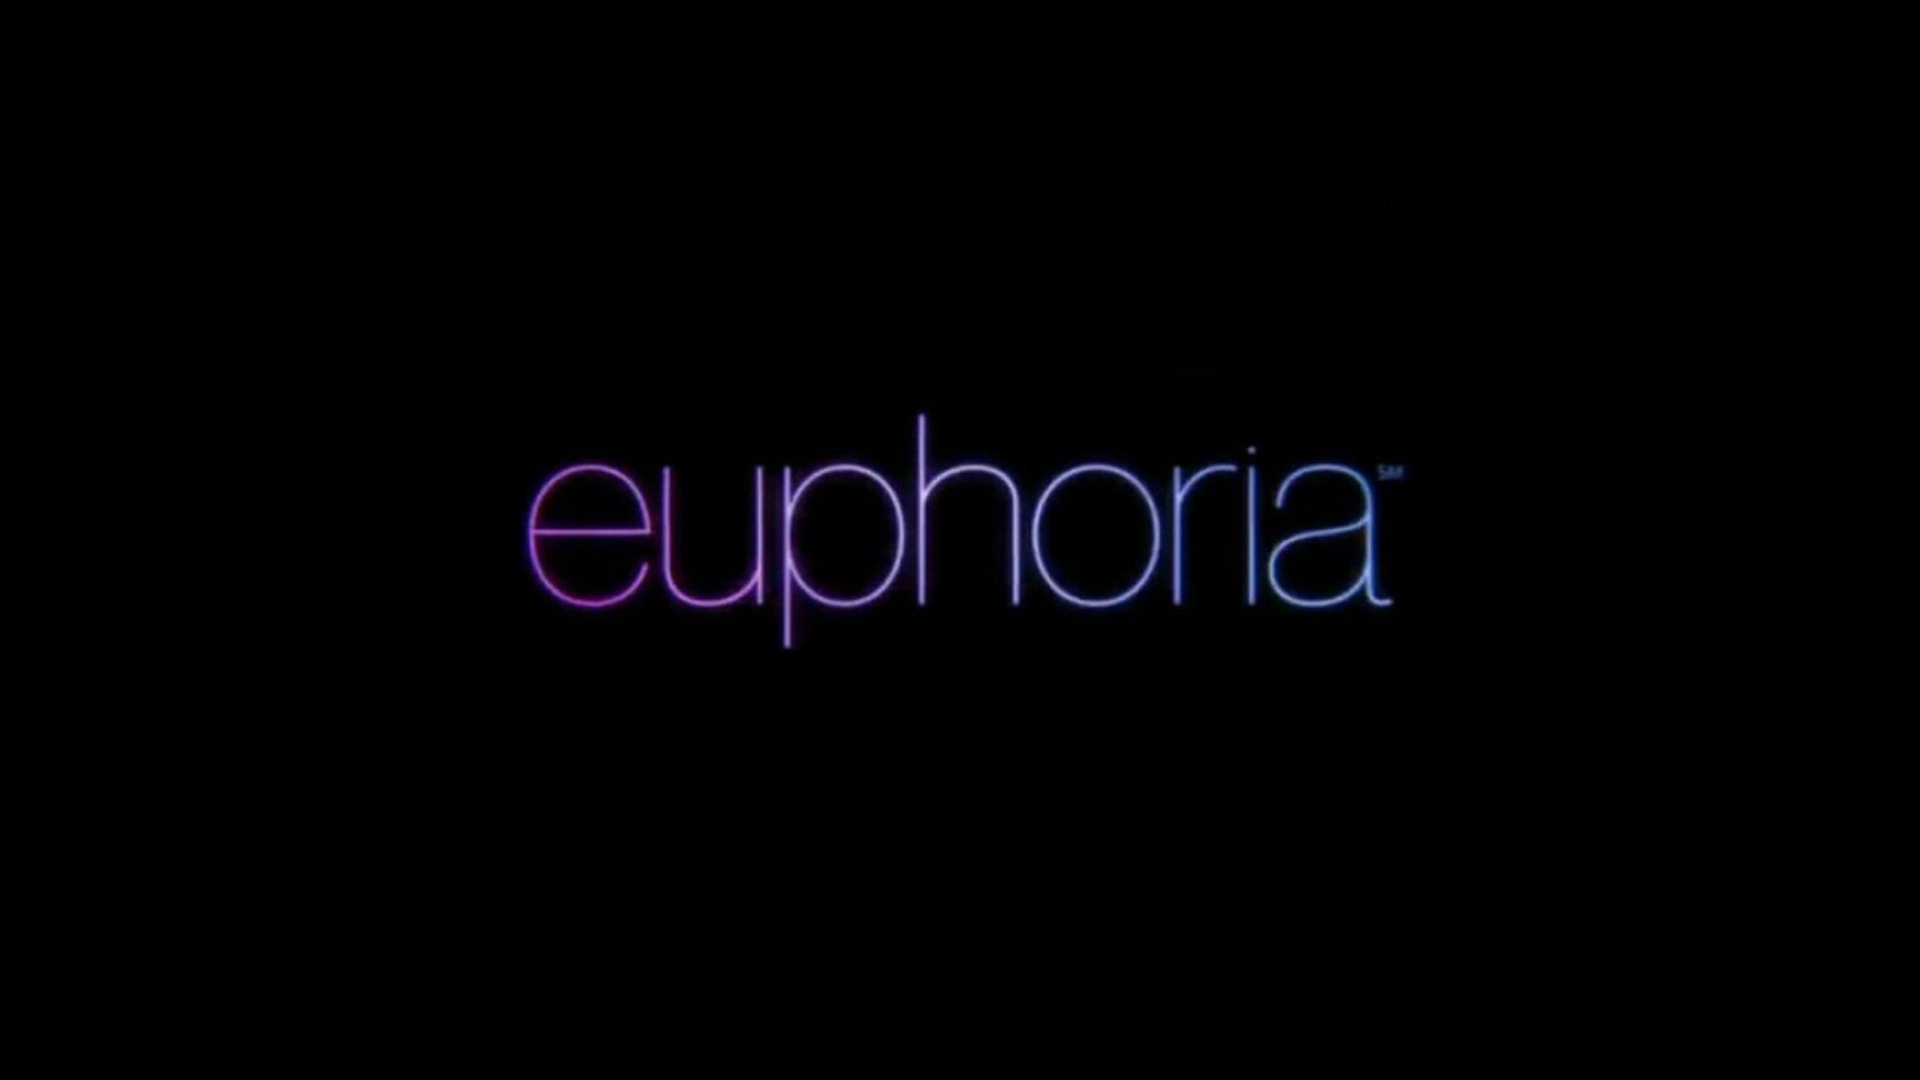 Euphoria (TV Series): An American teen drama created and written by Sam Levinson, HBO. 1920x1080 Full HD Wallpaper.